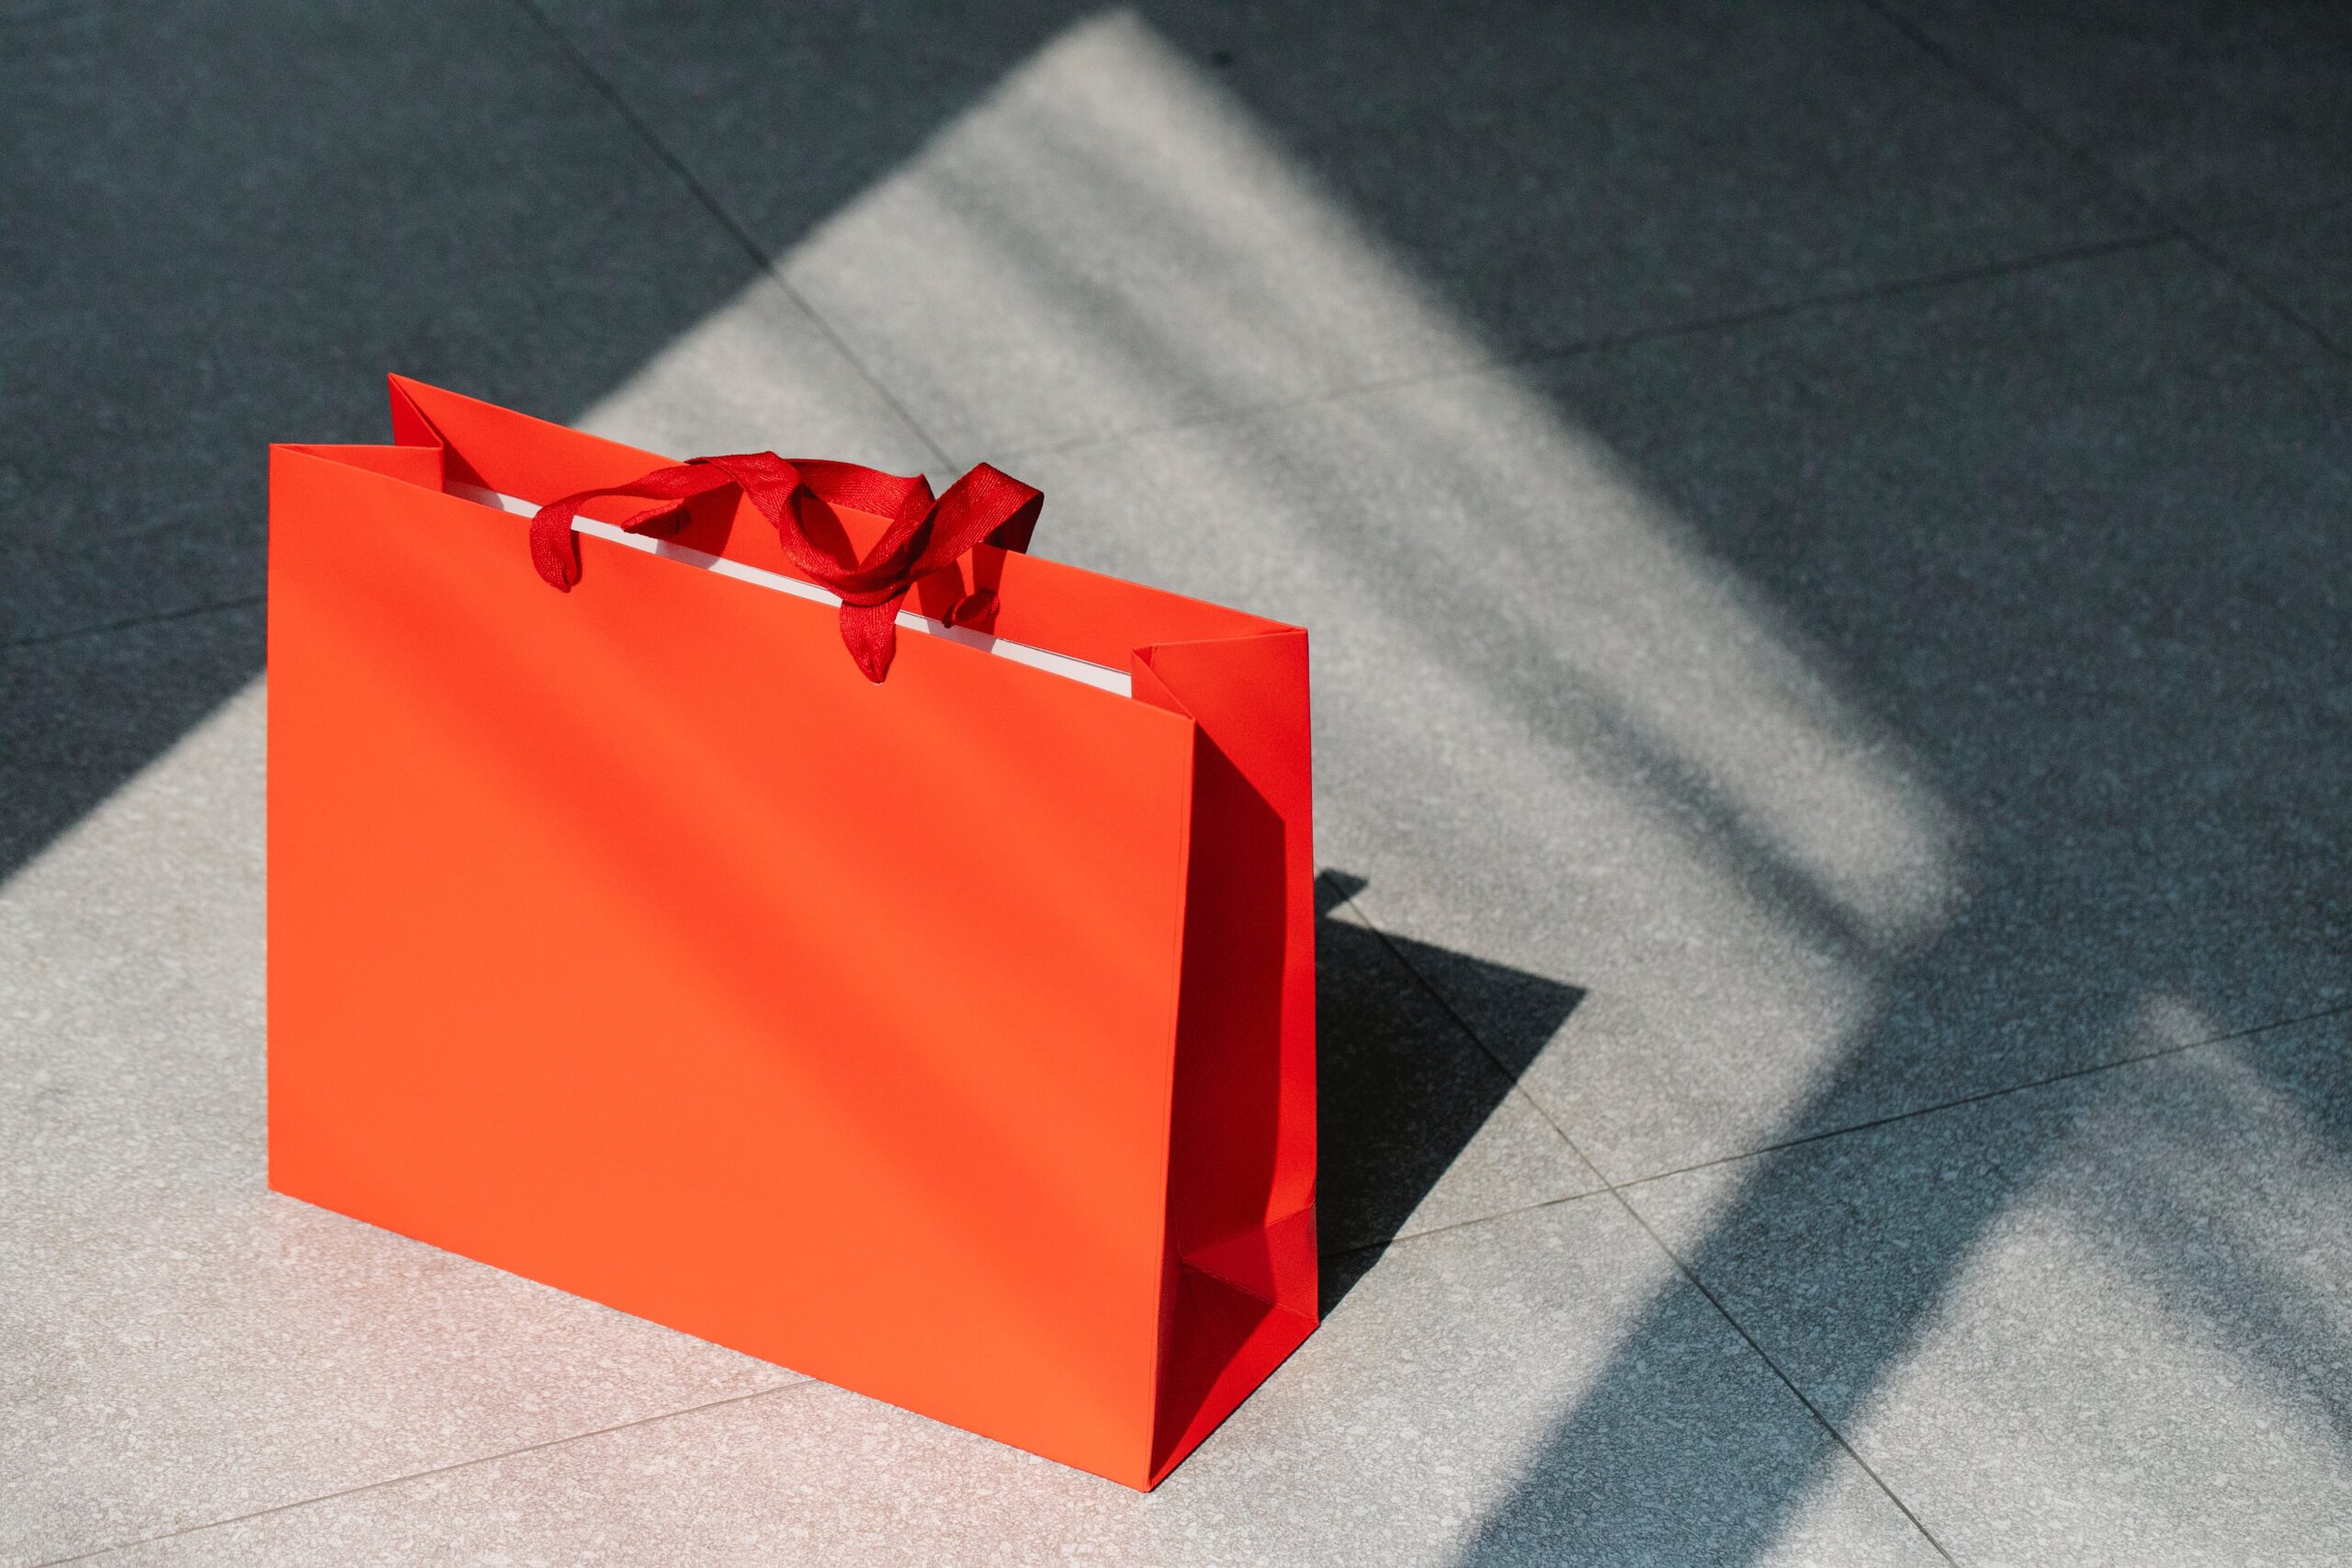 Red gift bag sitting on ground